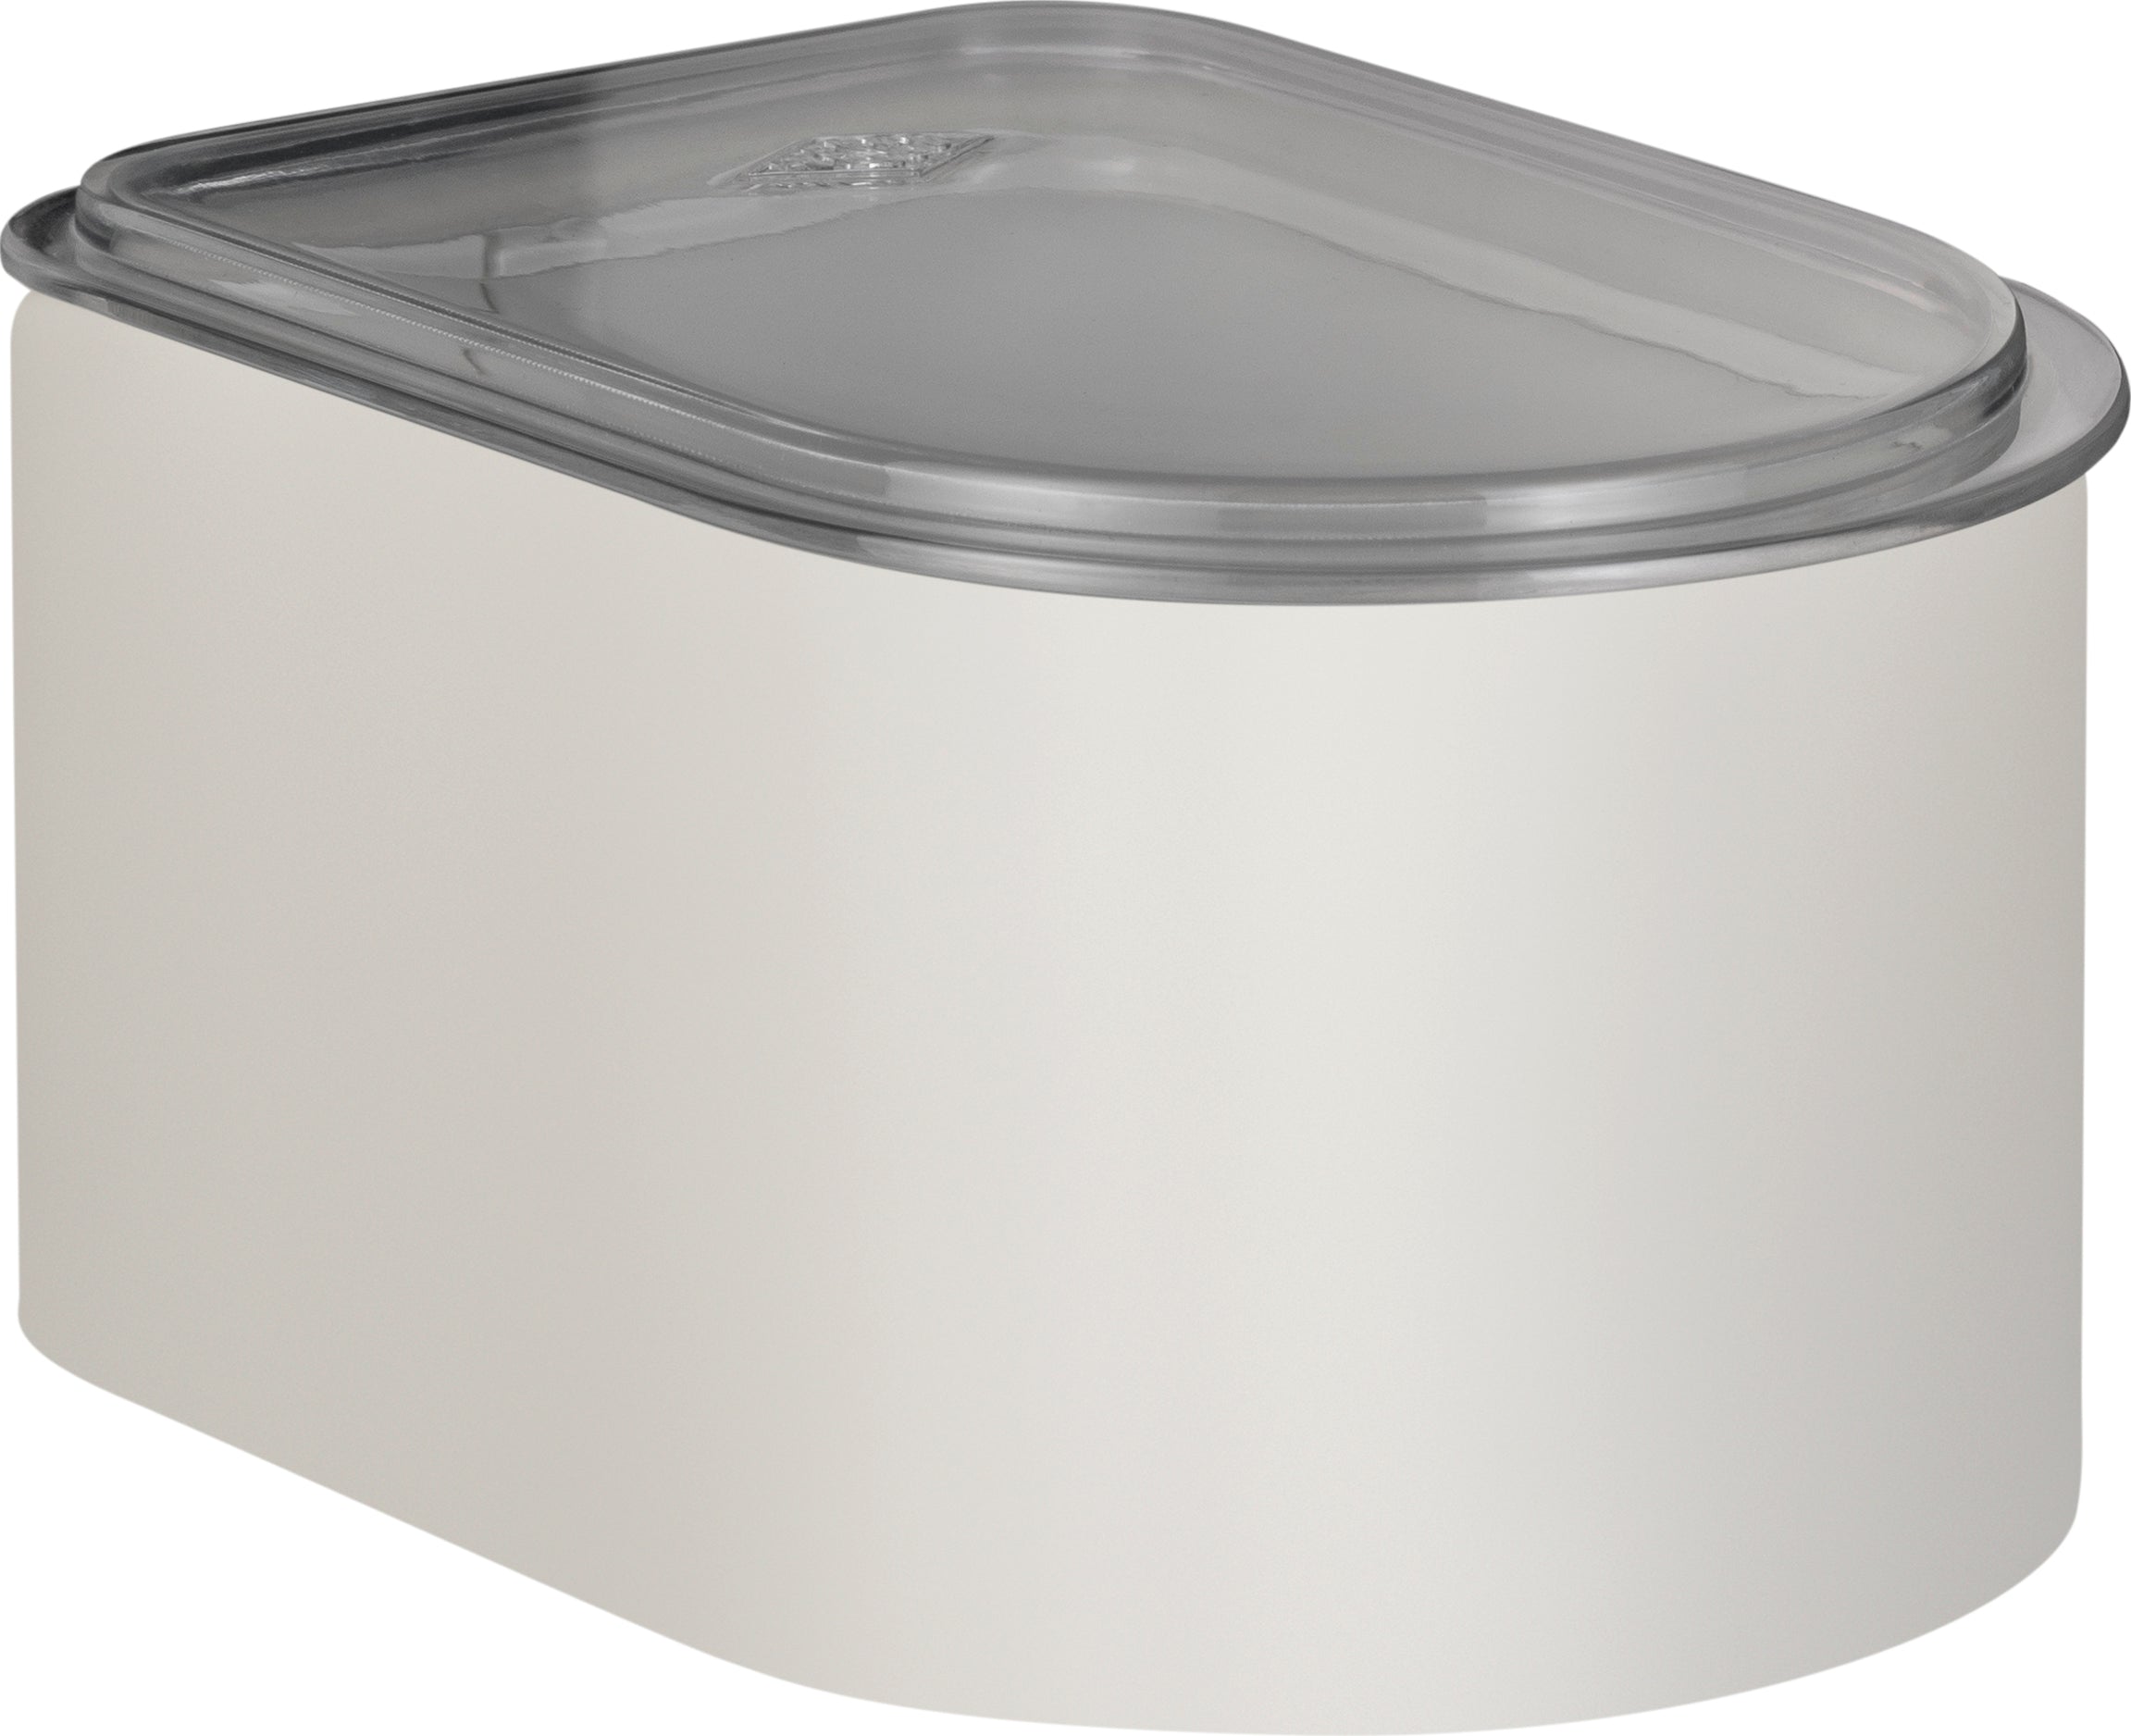 Wesco Canister 1 Litre With Acrylic Lid, Sand Matt